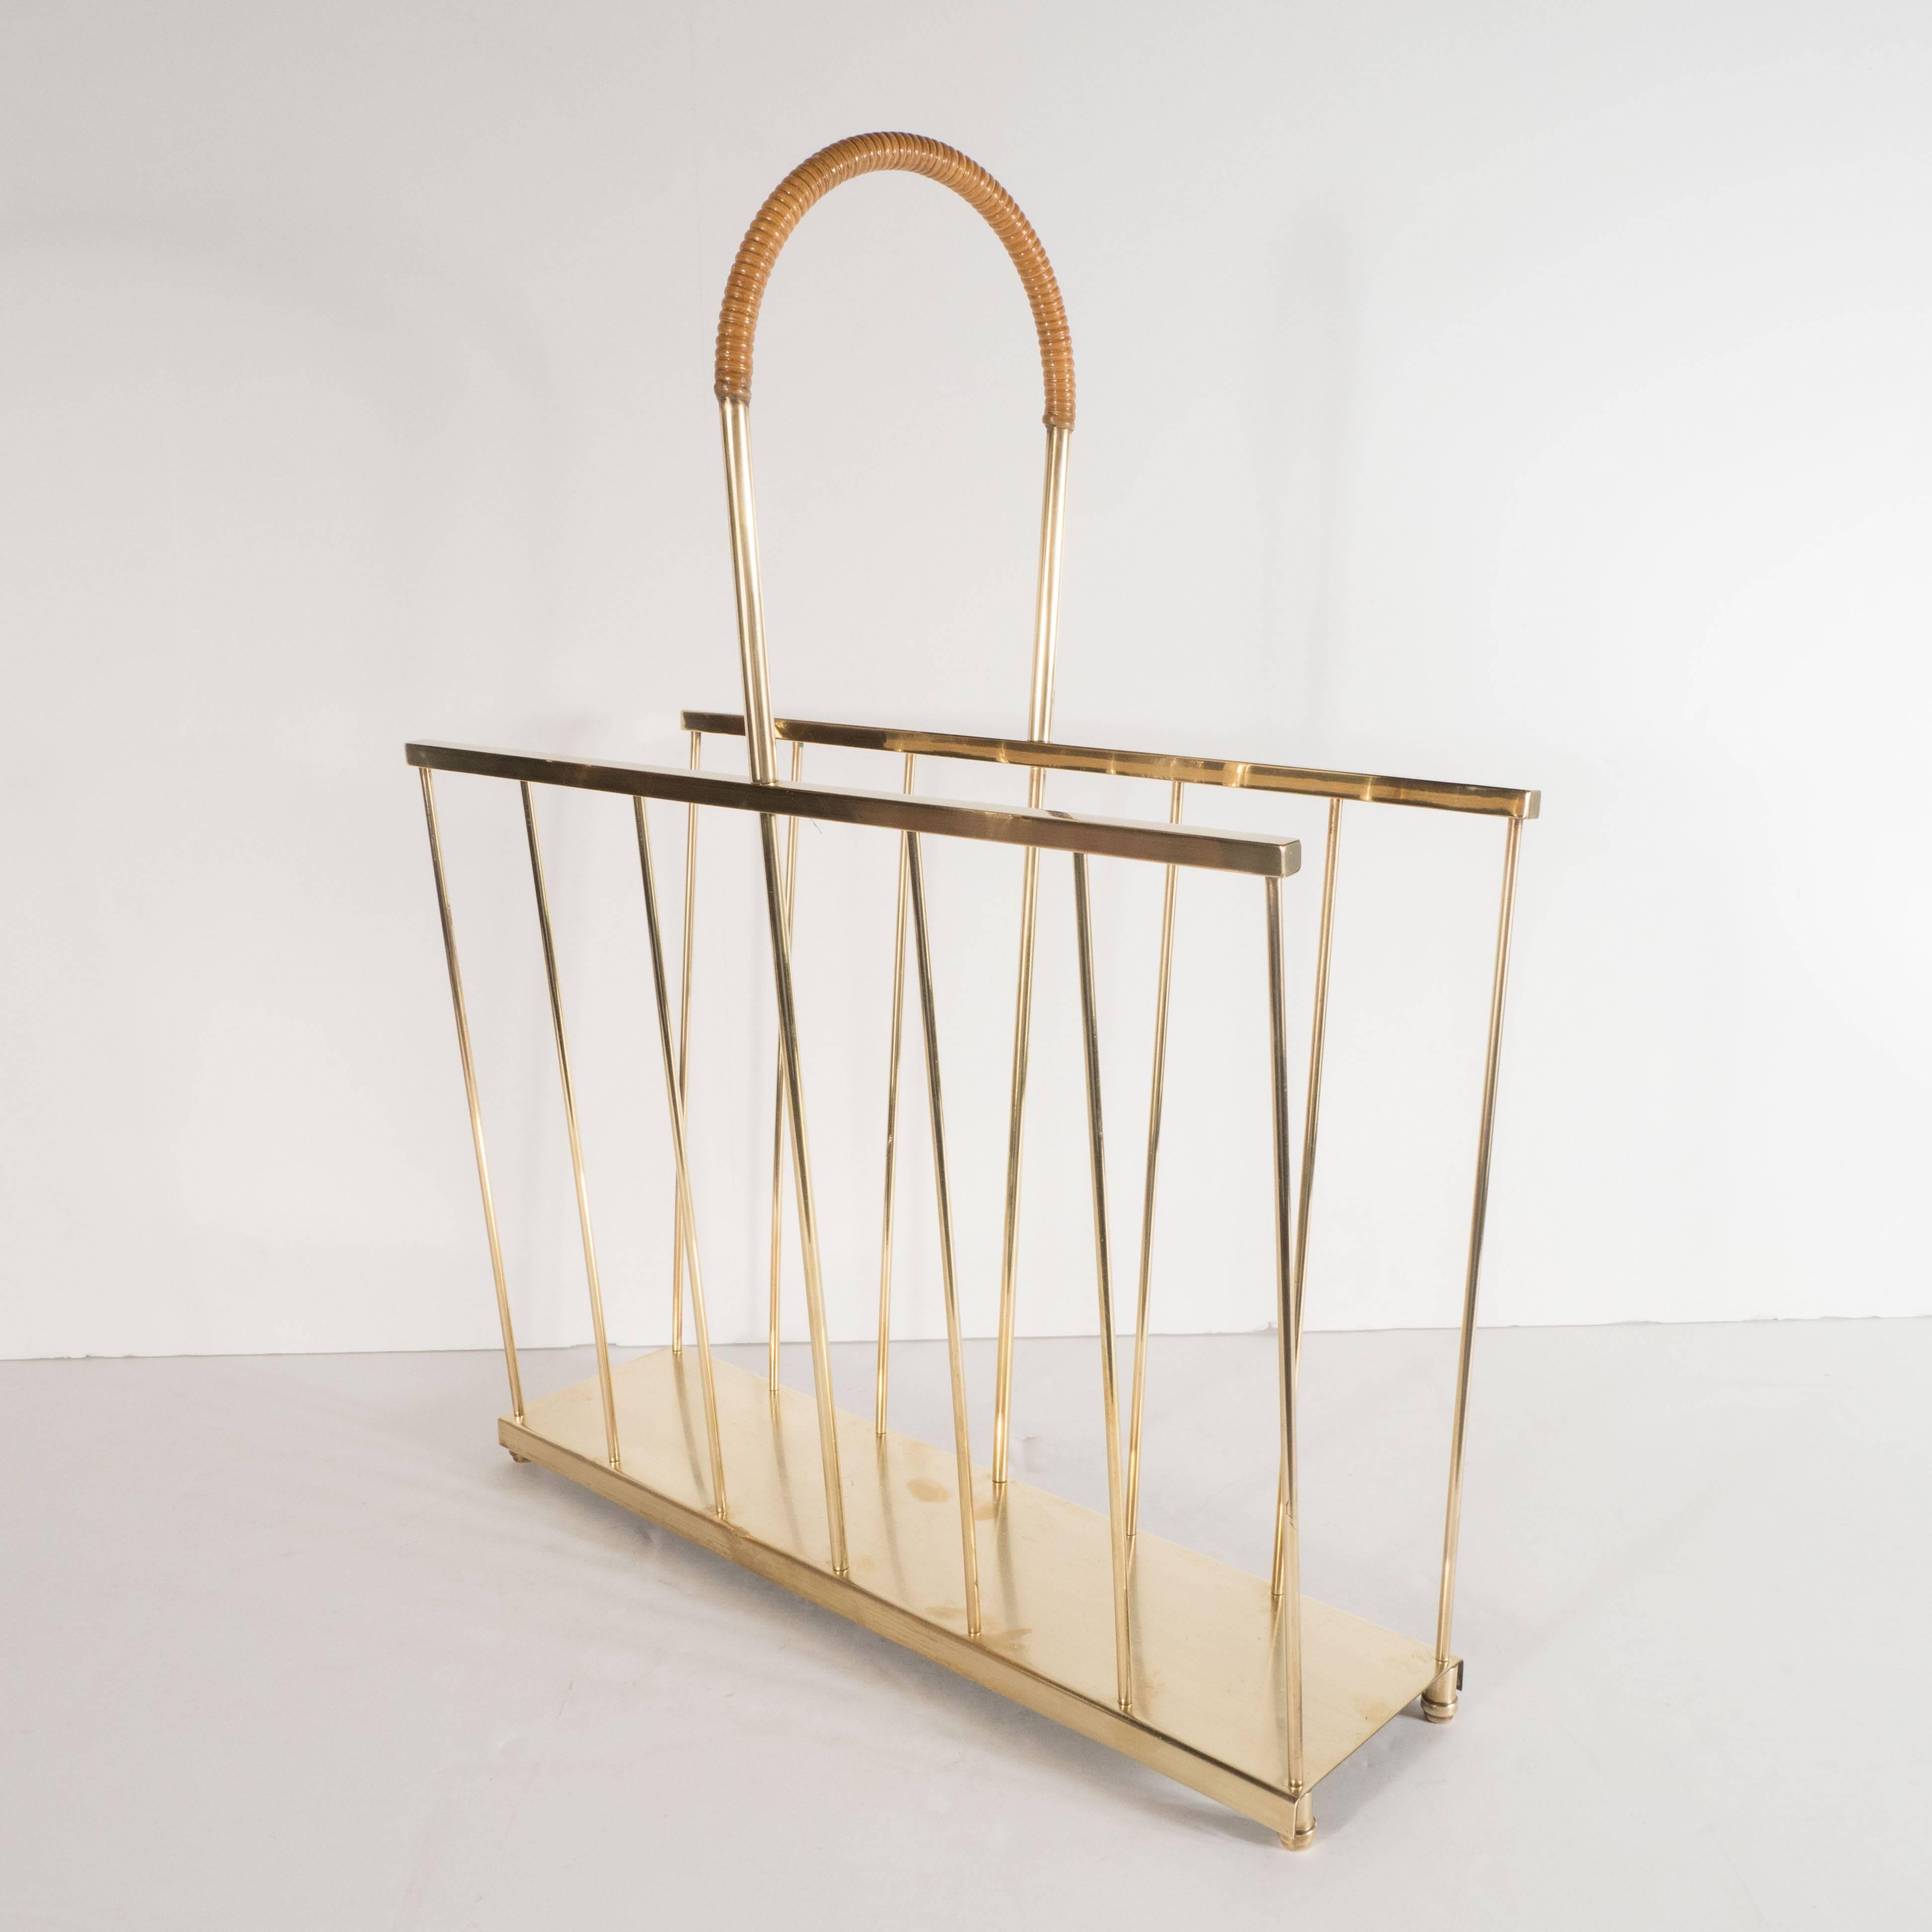 This elegant and refined magazine Stand was realized by the celebrated New York producer Maxwell-Phillips, circa 1960. It features a rectangular base with two inverted sides set at opposing angles composed of vertical rods in brushed brass. It